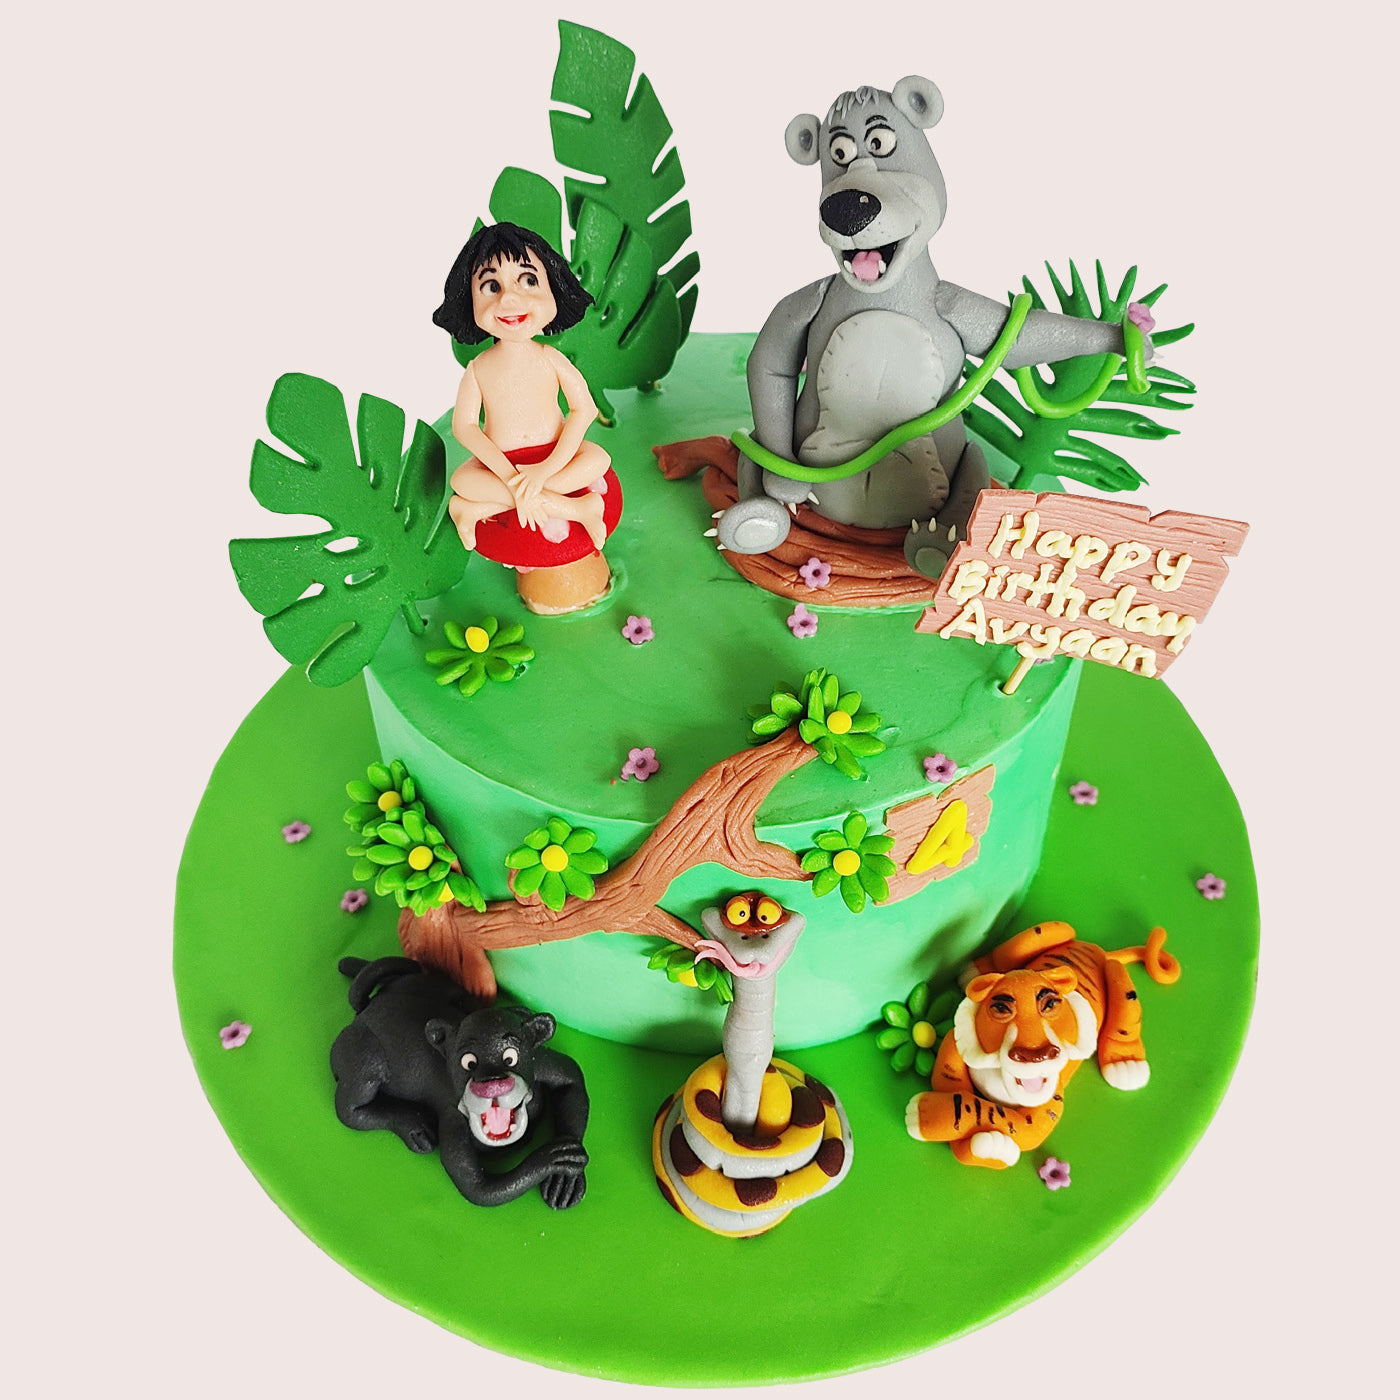 Mowgli and the jungle book... - Zoey's Bakehouse | Facebook